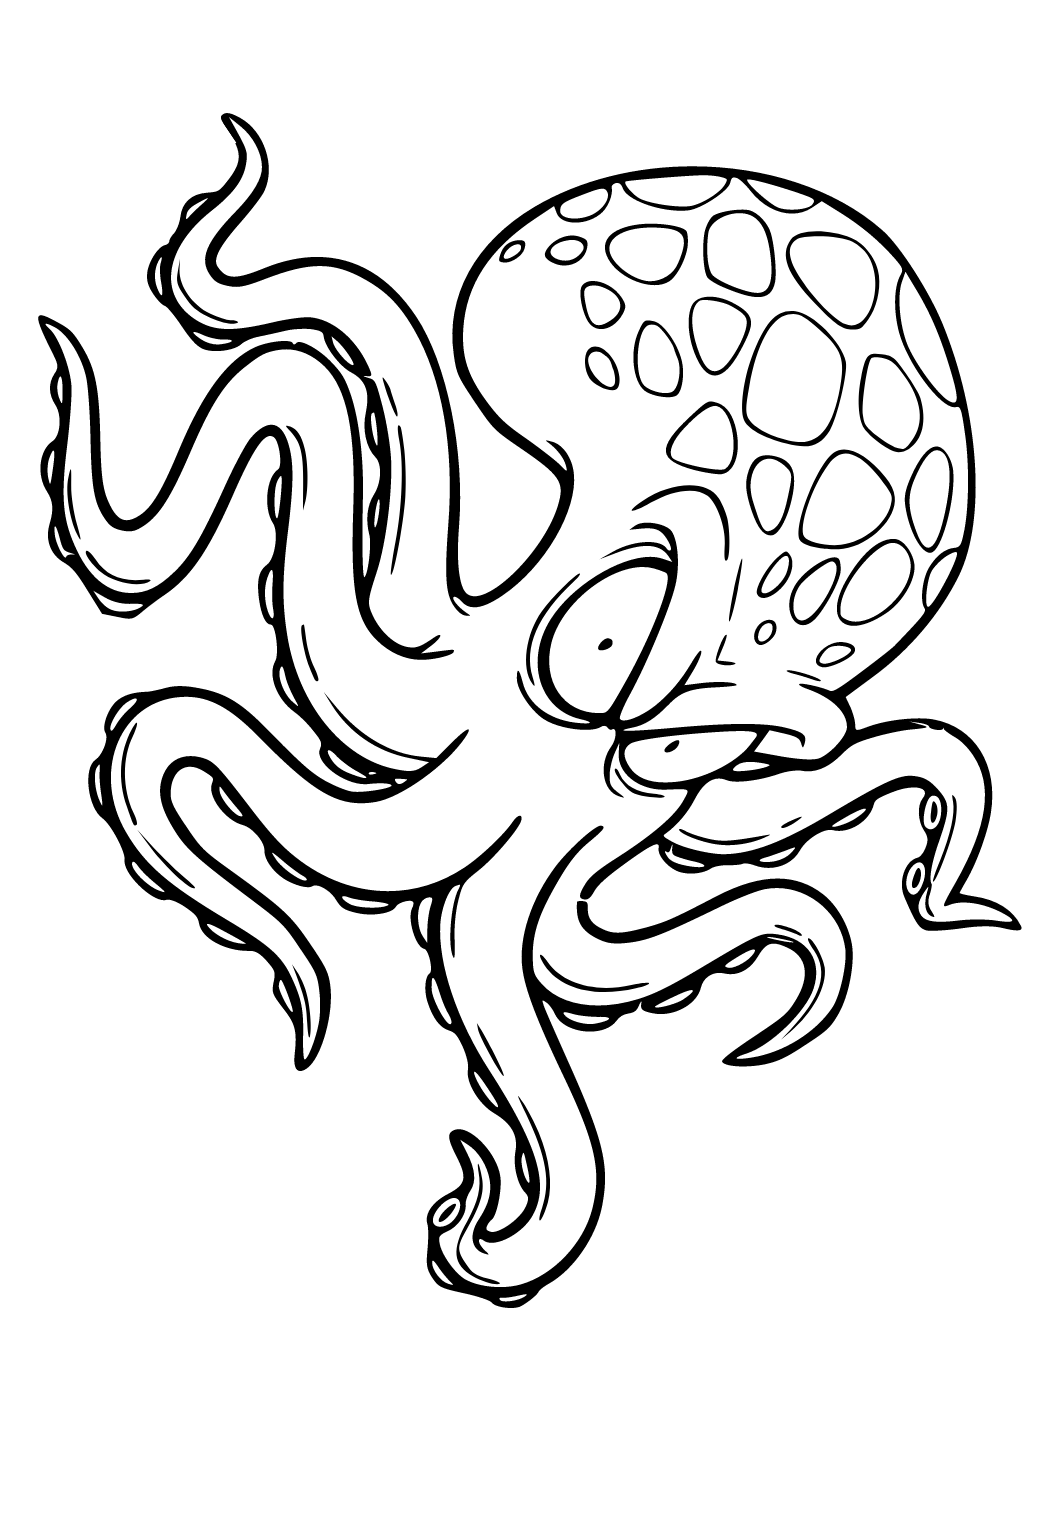 Free printable octopus spiteful coloring page for adults and kids